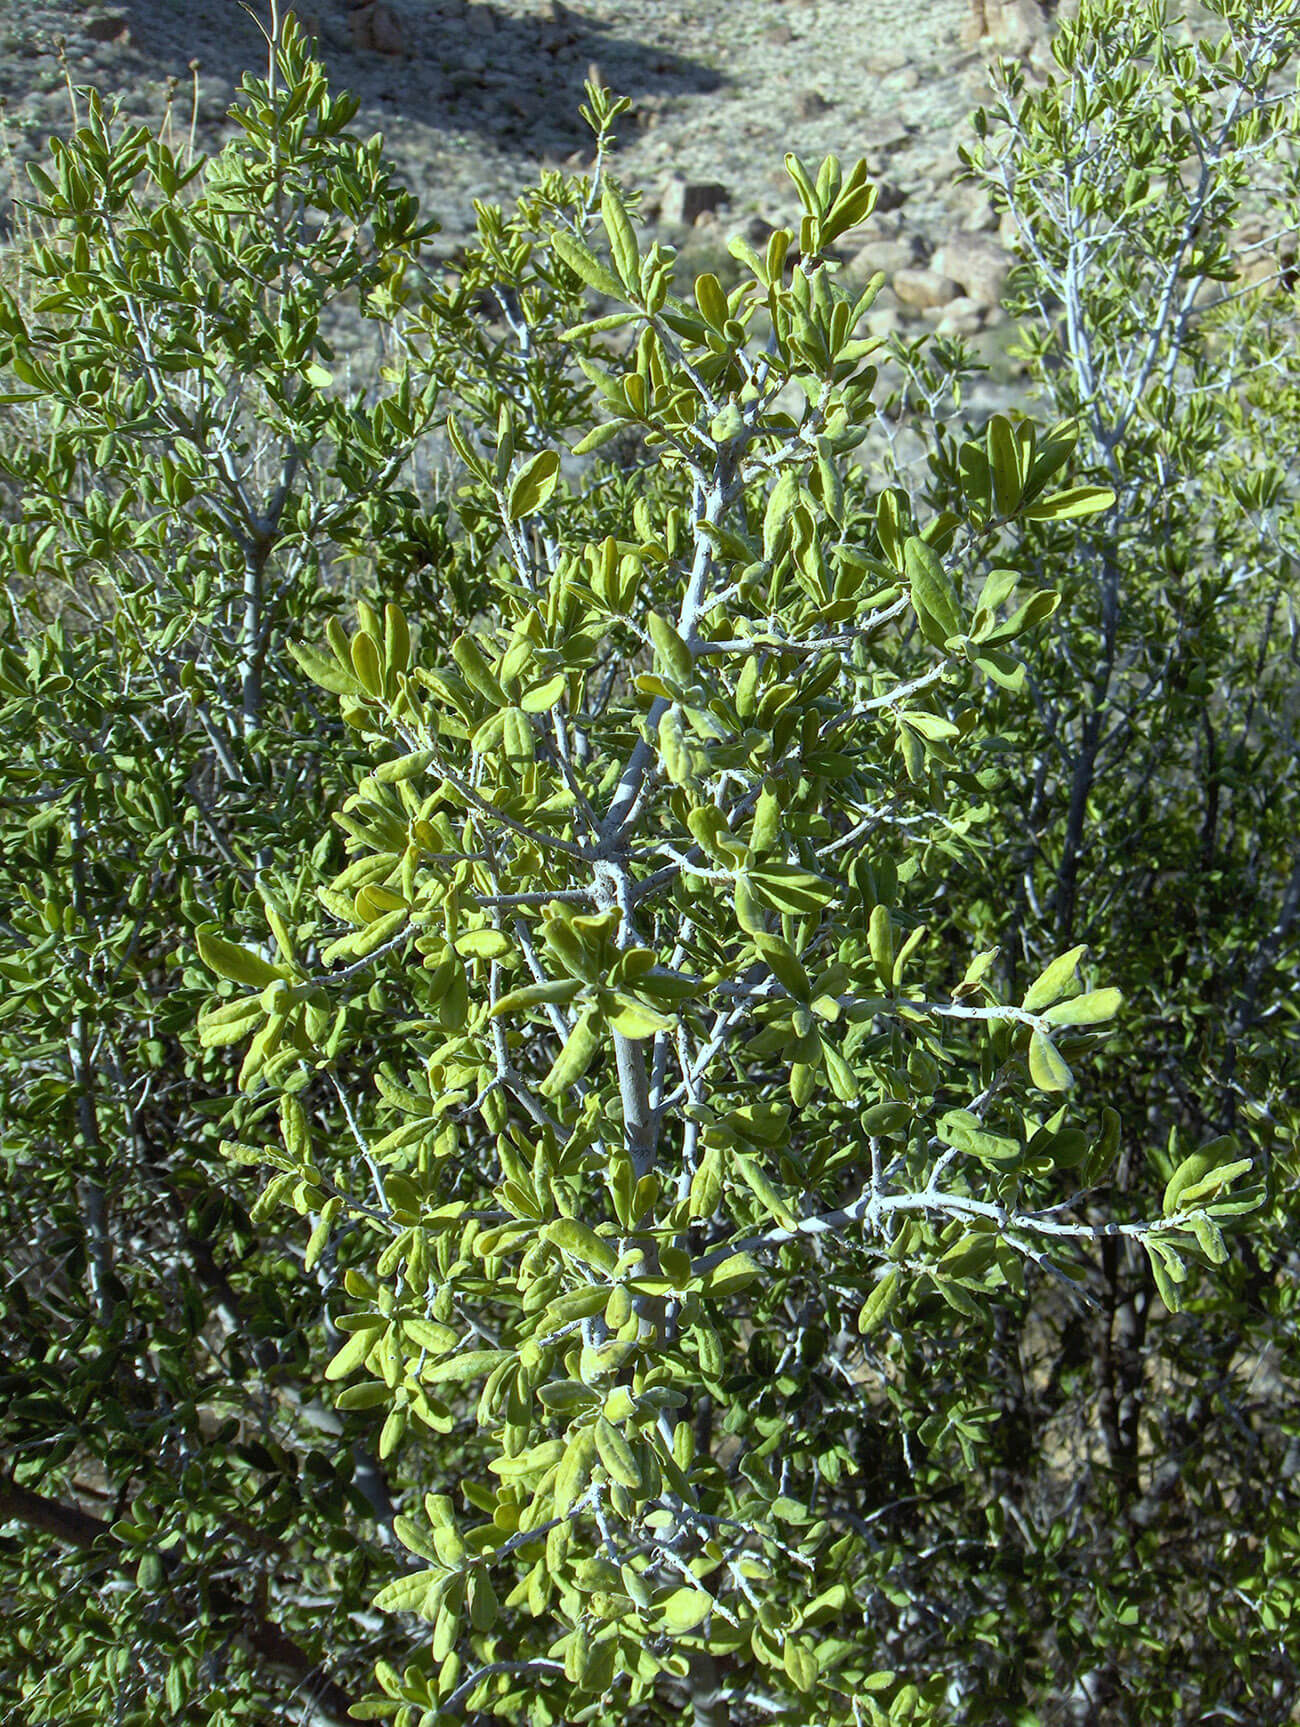 A bright green tree with many leaves and small fruits